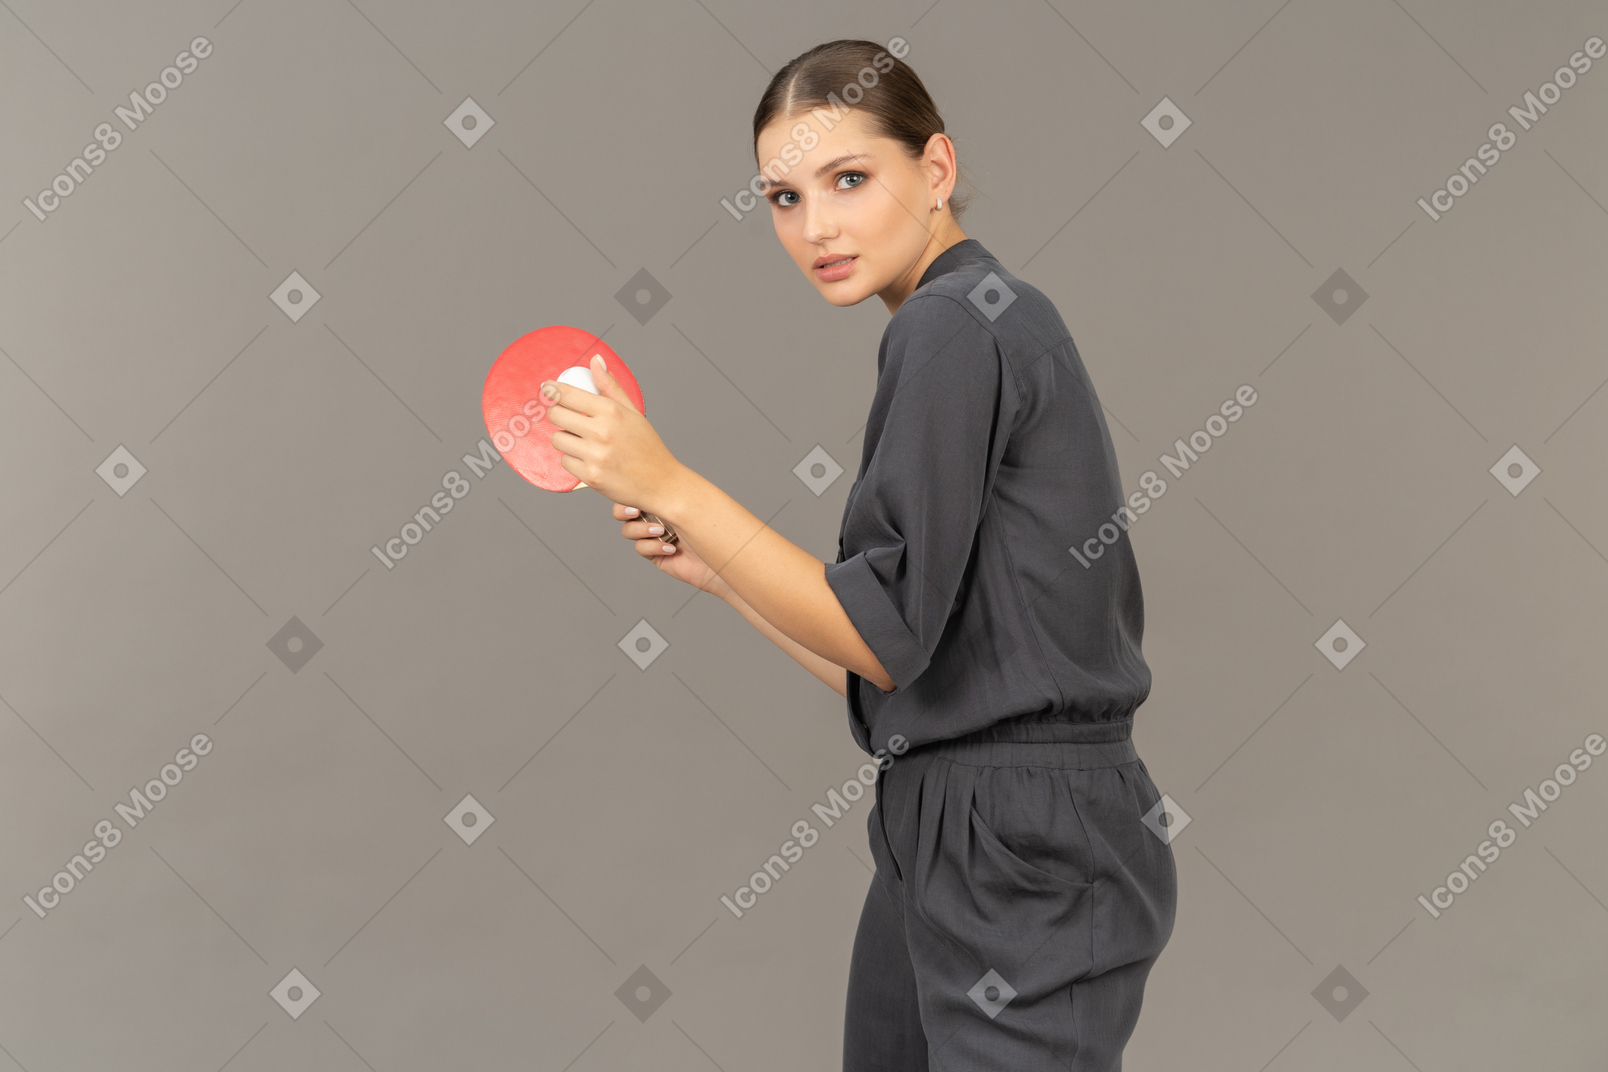 Side view of young woman in a jumpsuit serving tennis ball